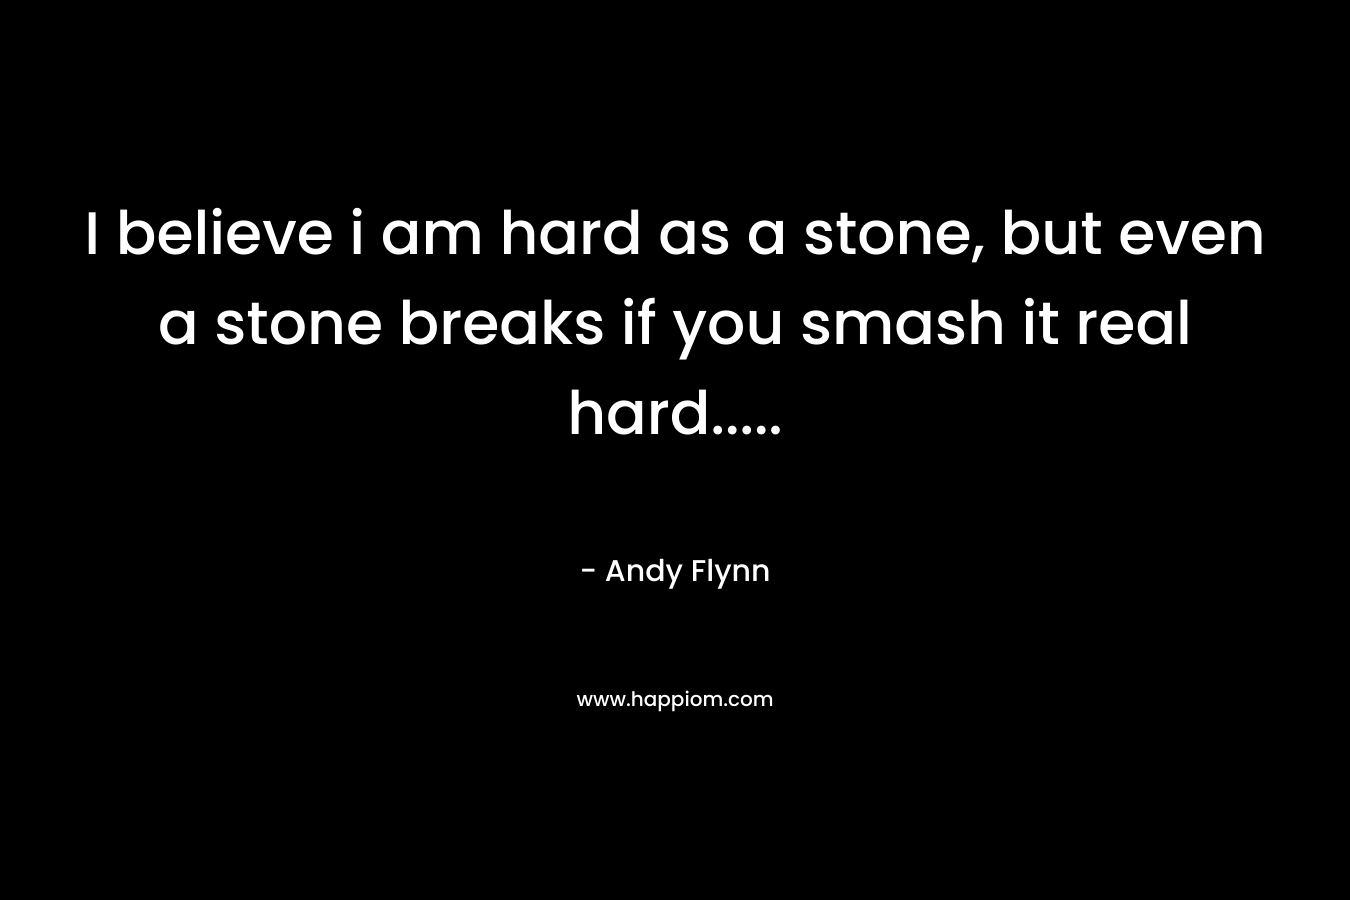 I believe i am hard as a stone, but even a stone breaks if you smash it real hard.....